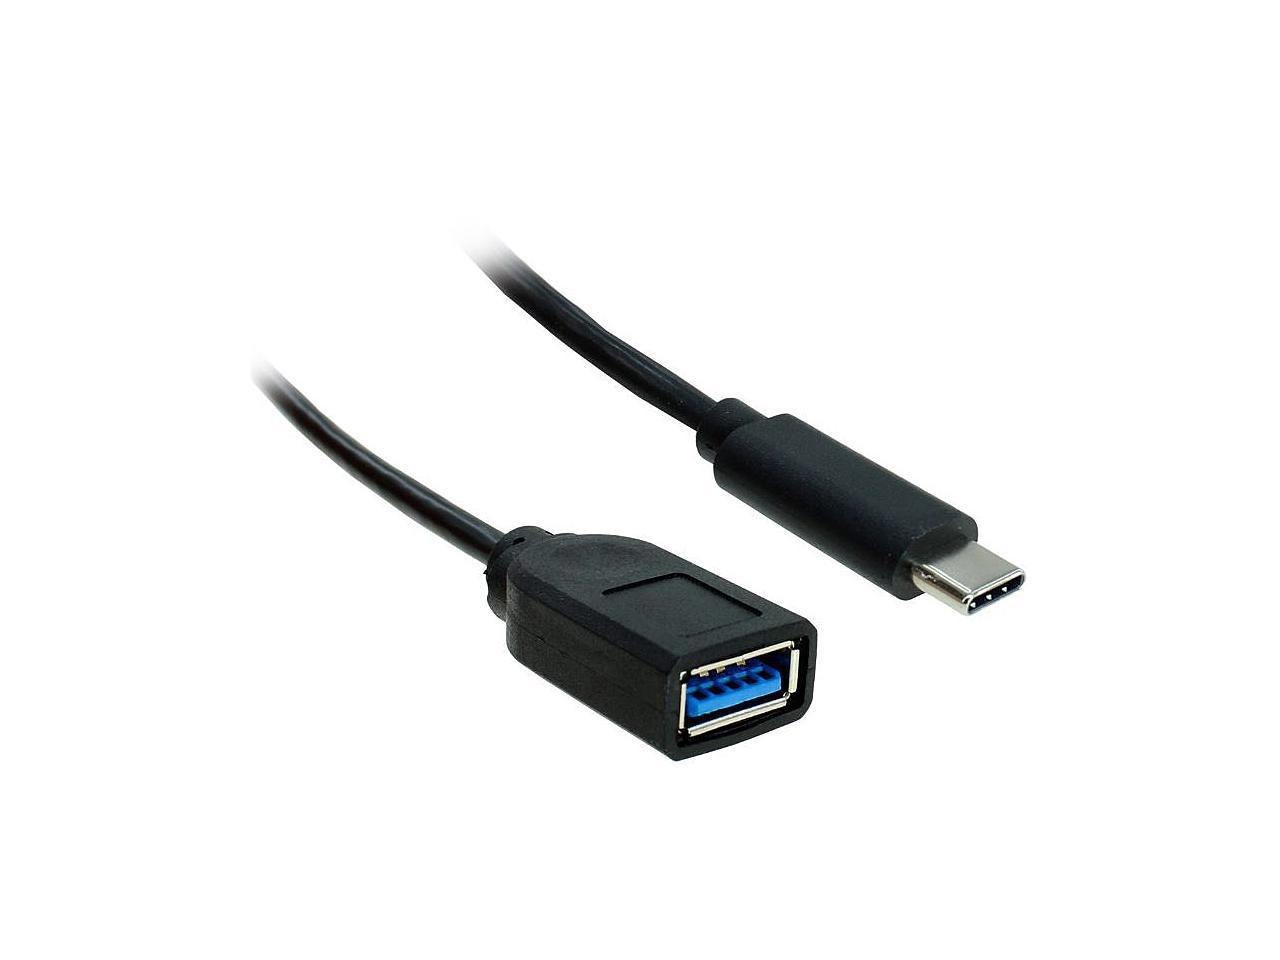 Nippon Labs 6 Inch Usb 3.2 Gen 1 Usb-C To Usb A Female Otg Cable